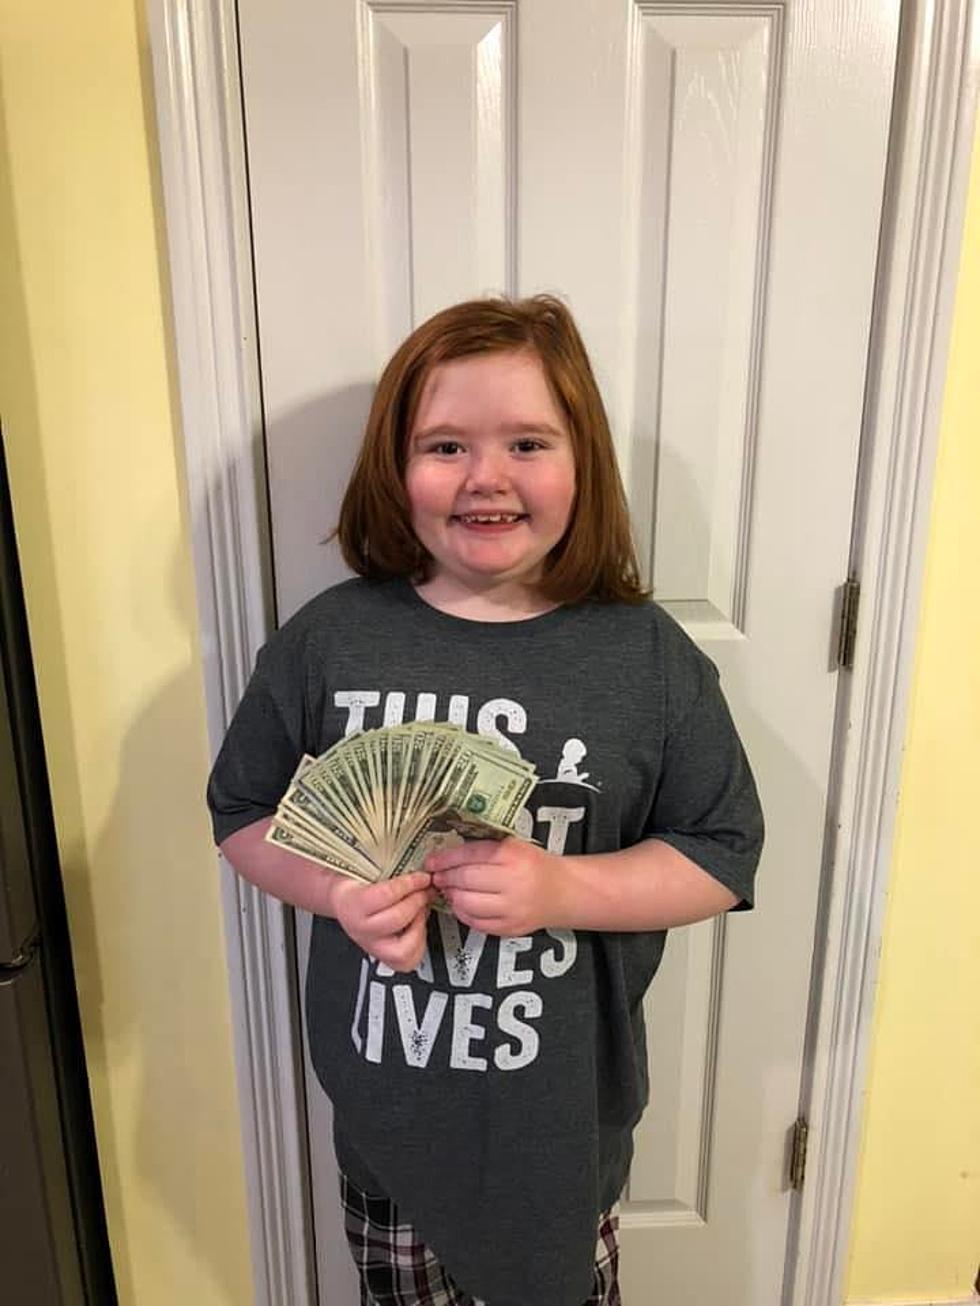 Owensboro Girl Sells Delicious Homemade Dog Treats to Raise Money for St. Jude